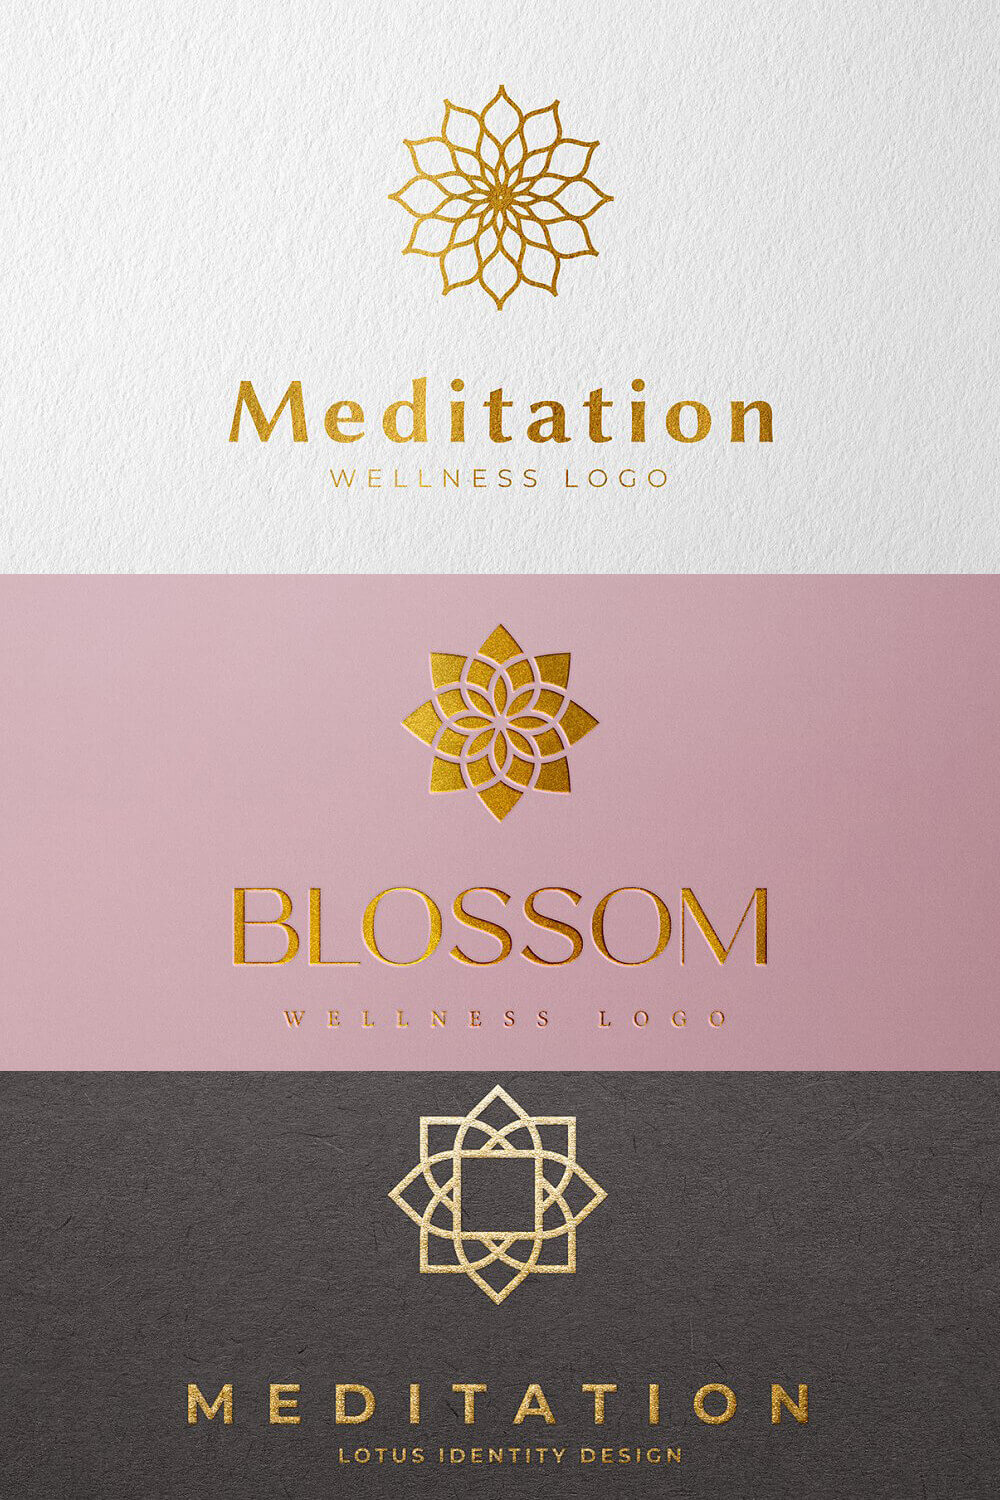 Three variants of logos with the image of a lotus of different geometric shapes on a white, pink and dark gray backgrounds.